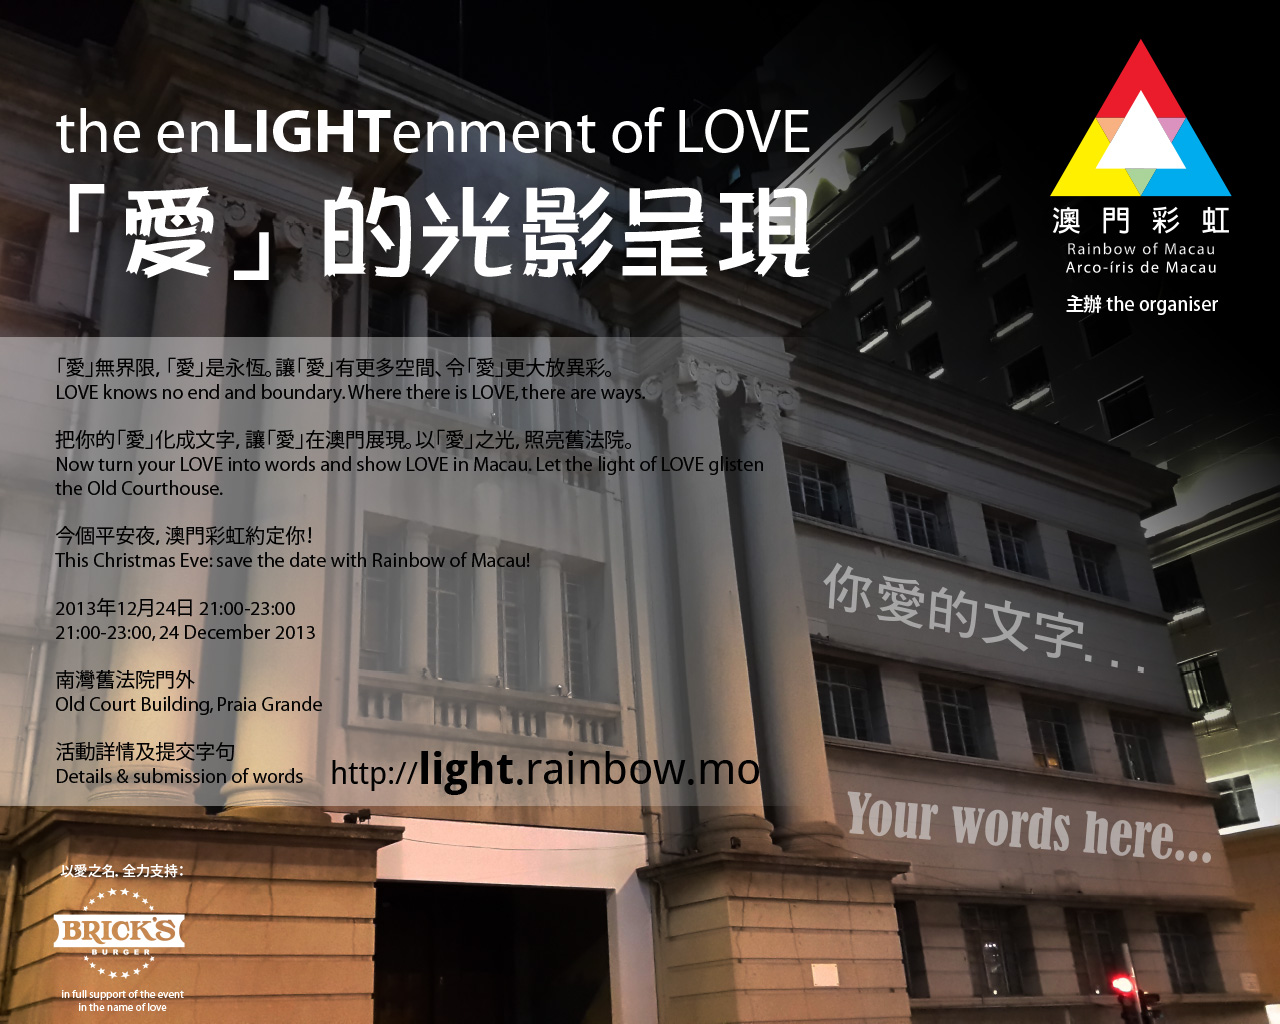 The Enlightenment of Love